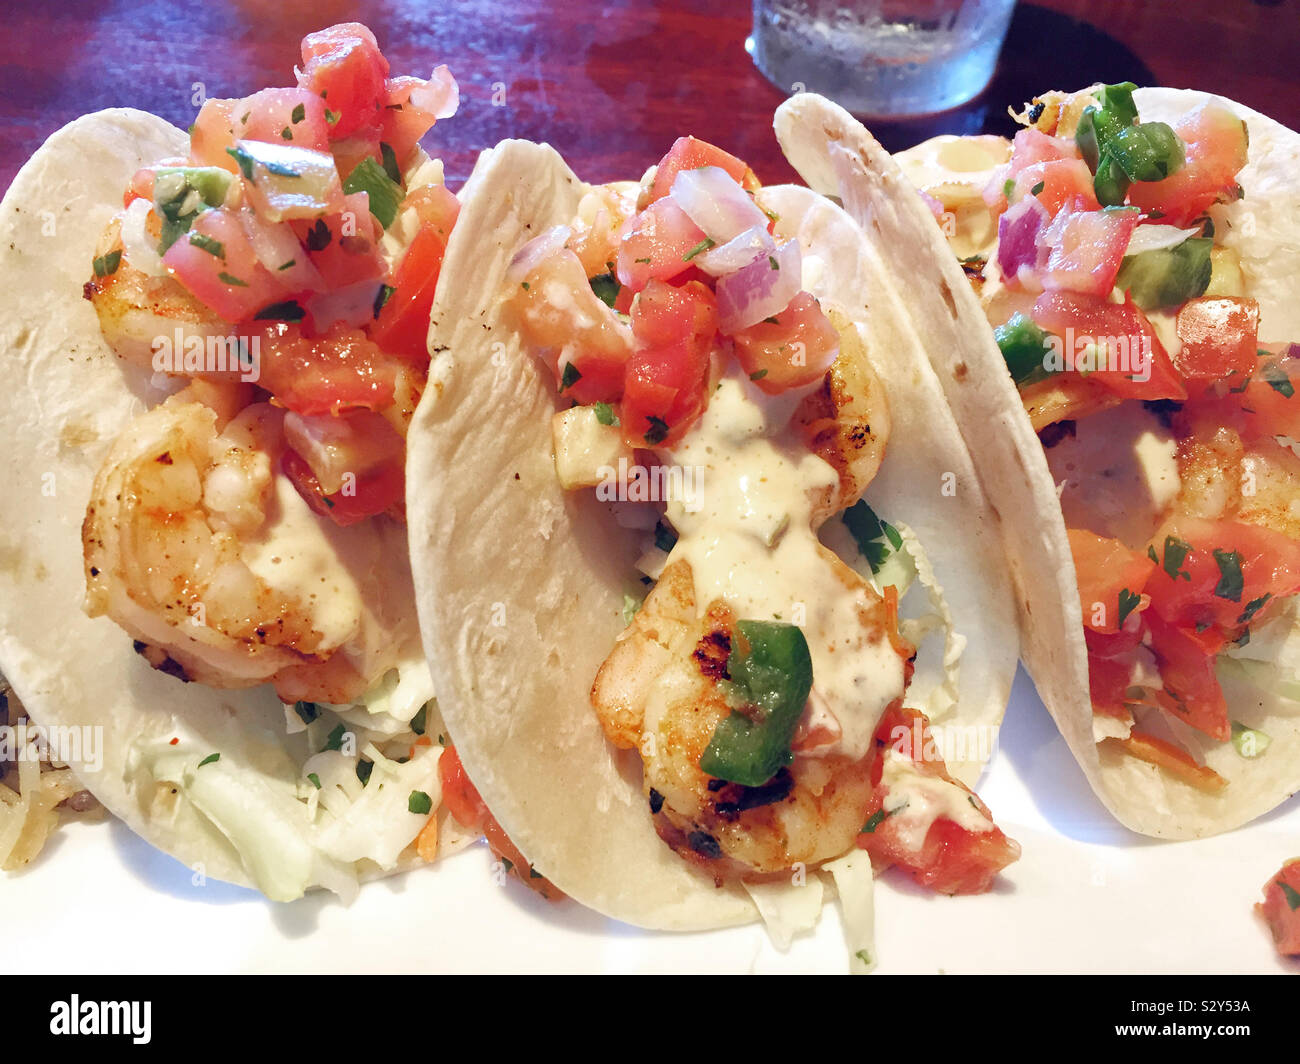 A serving of three grilled shrimp tacos smothered with fresh pico de gallo and spicy chipotle sauce. Stock Photo